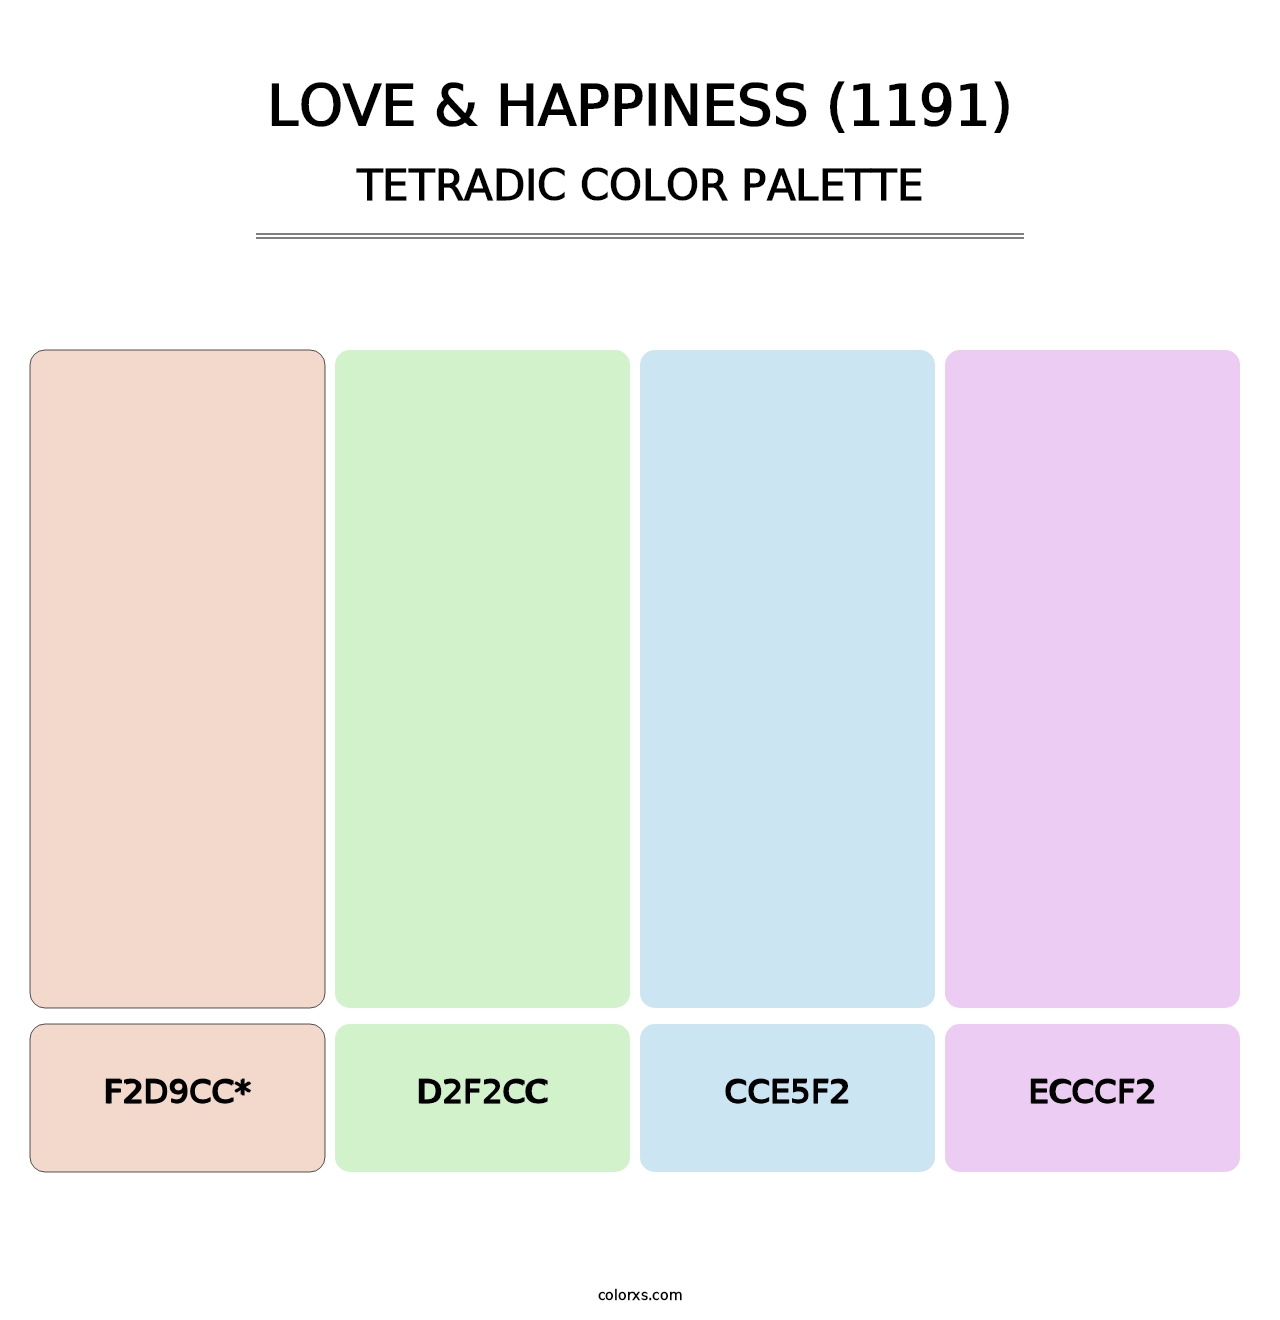 Love & Happiness (1191) - Tetradic Color Palette